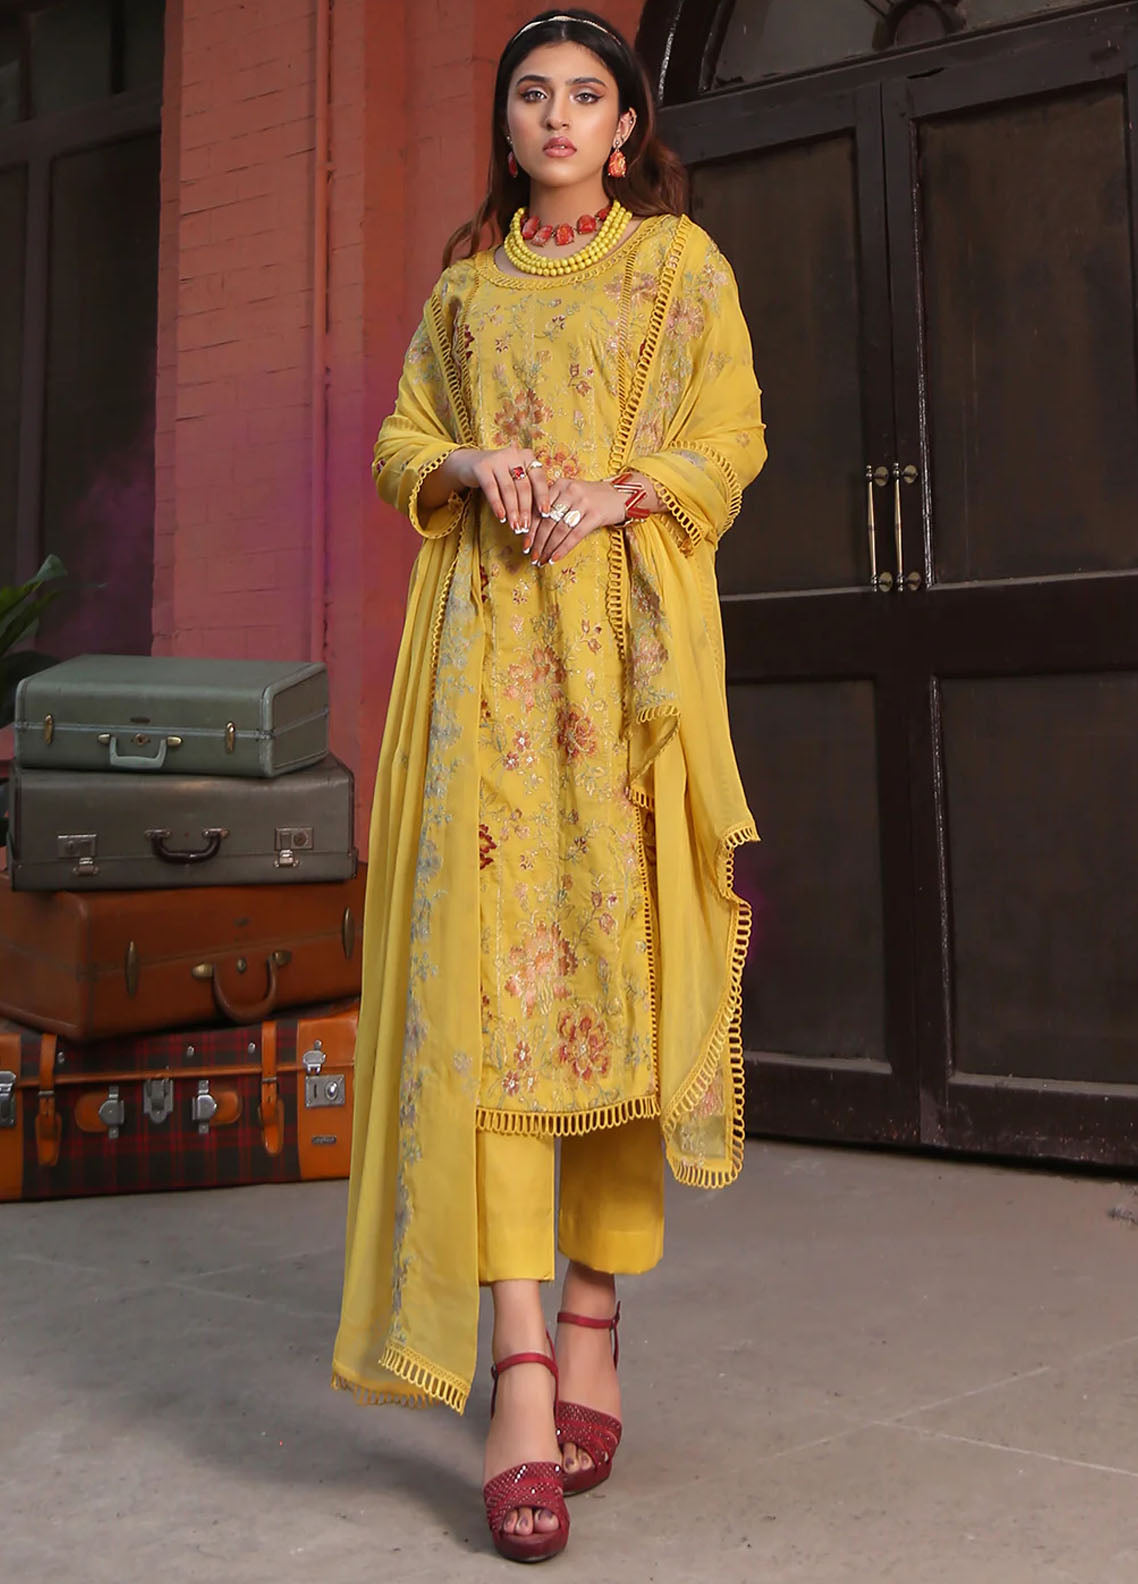 Mahnur Embroidered Lawn Suits Unstitched 3 Piece MN23L-V2 D-12 - Summer Collection